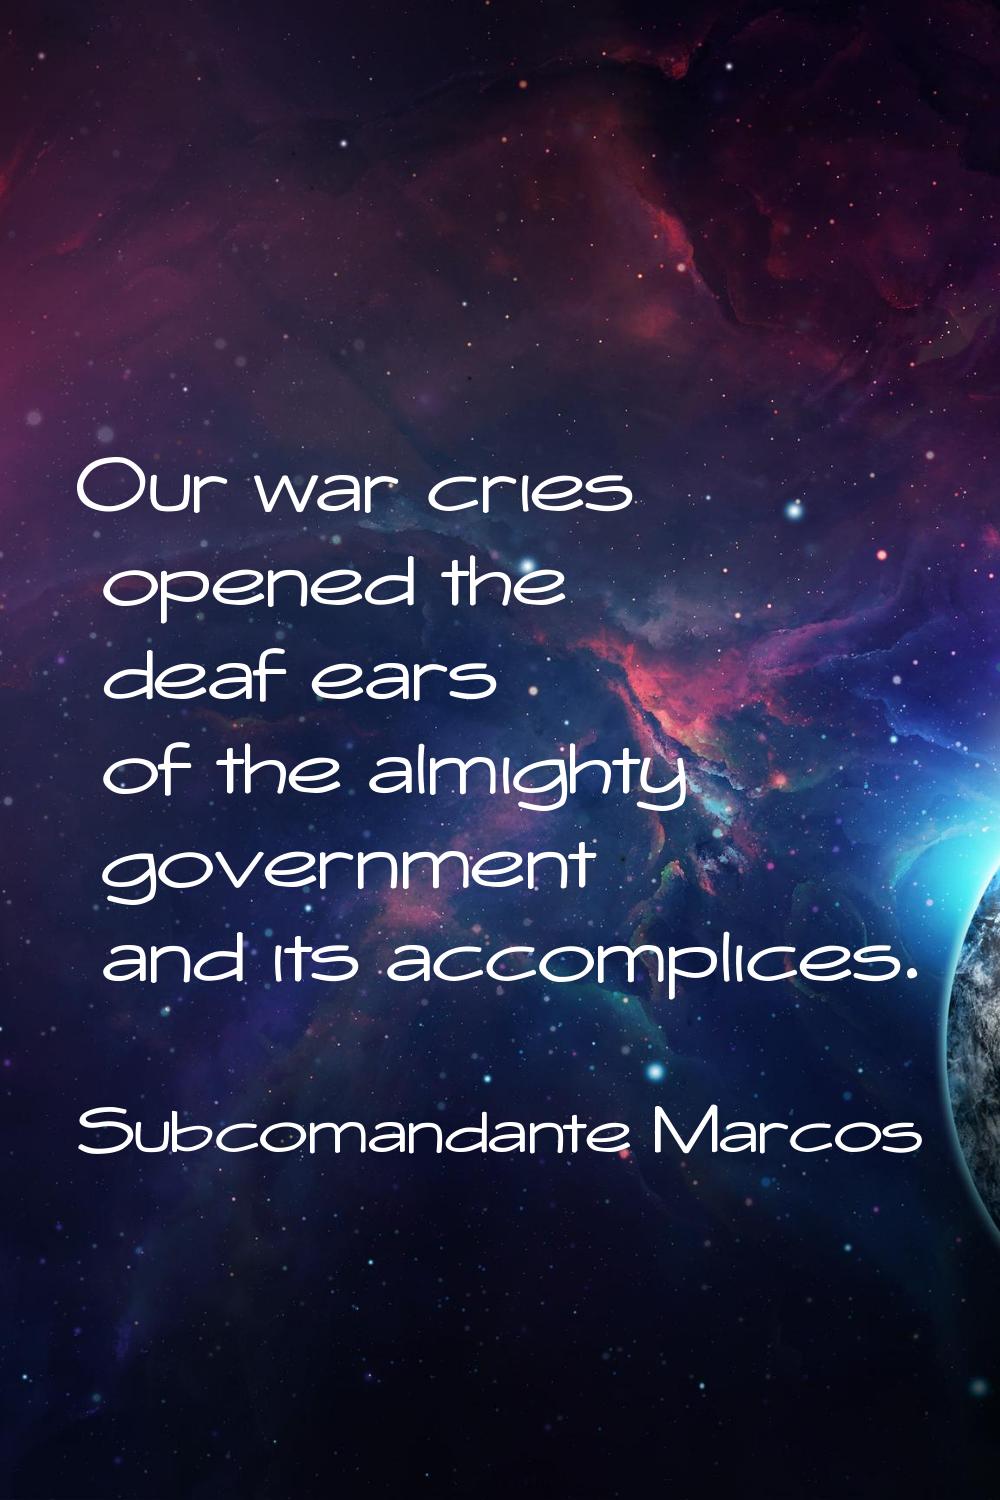 Our war cries opened the deaf ears of the almighty government and its accomplices.